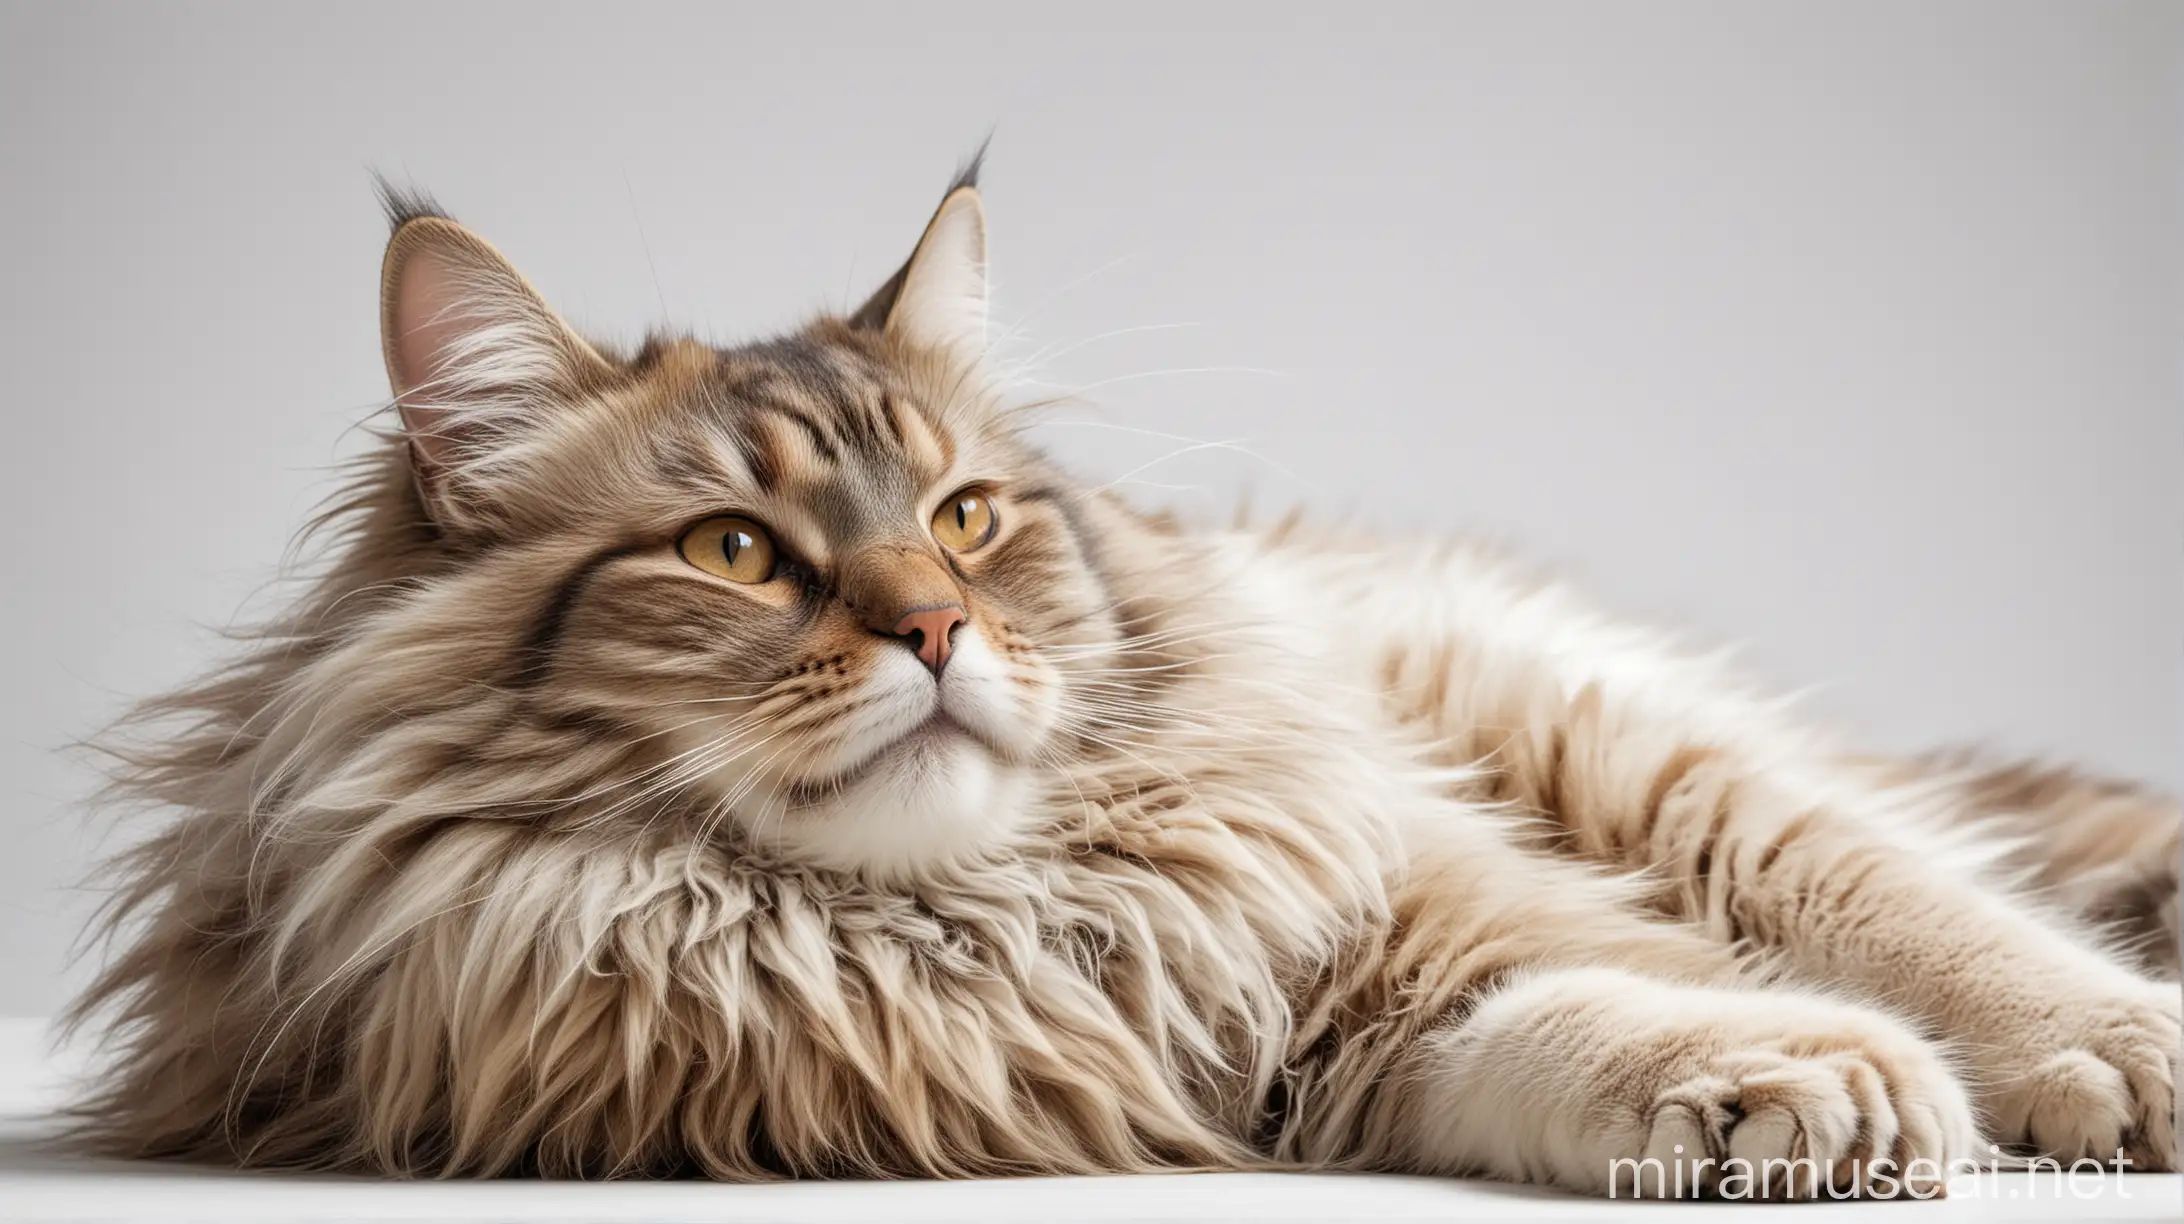 Relaxed Cat Lying Down Detailed Fur and Expression on White Background